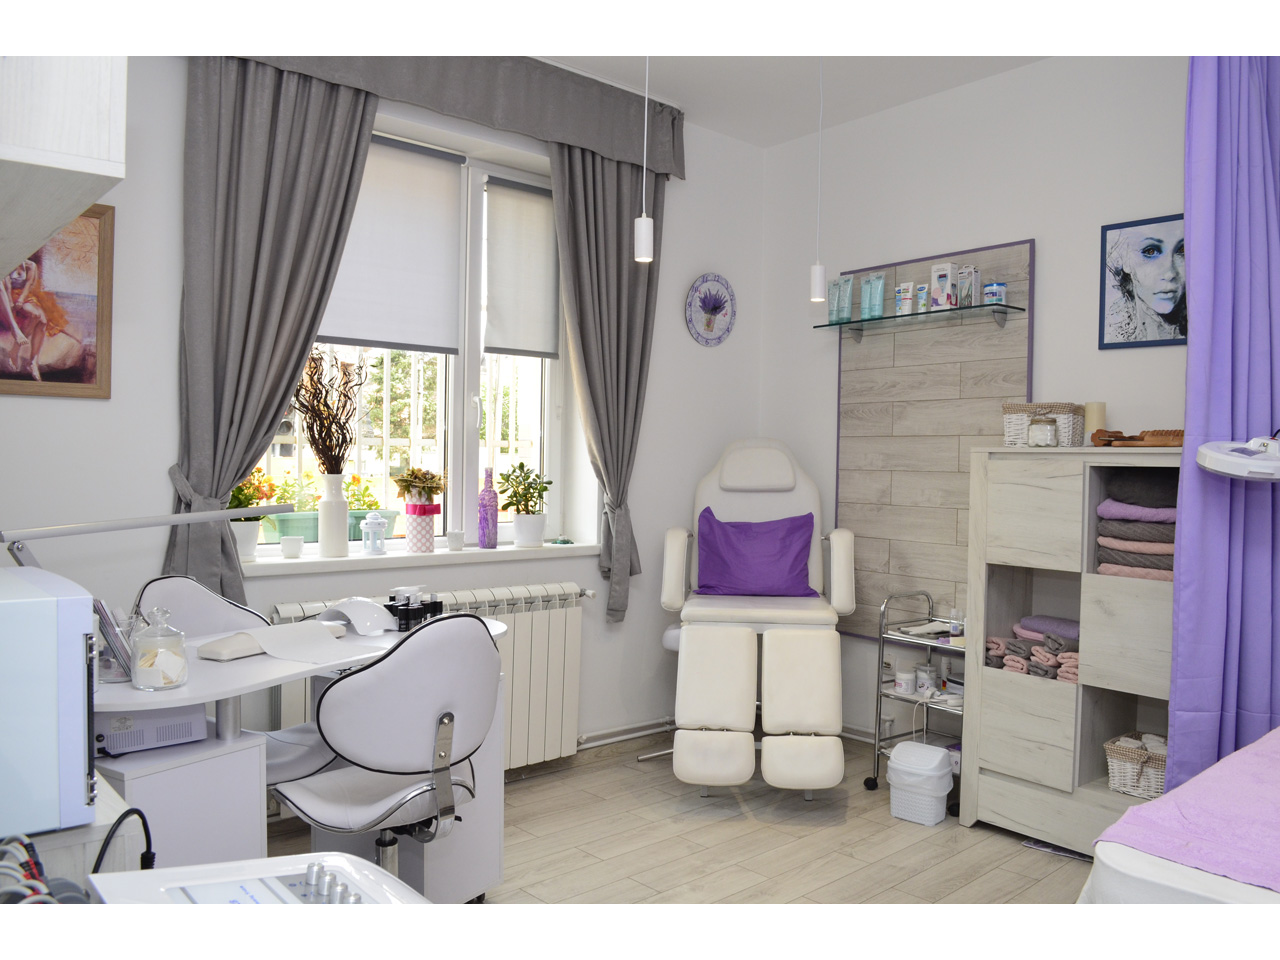 HOUSE OF BEAUTY STYLE UP Manicures, pedicurists Belgrade - Photo 4